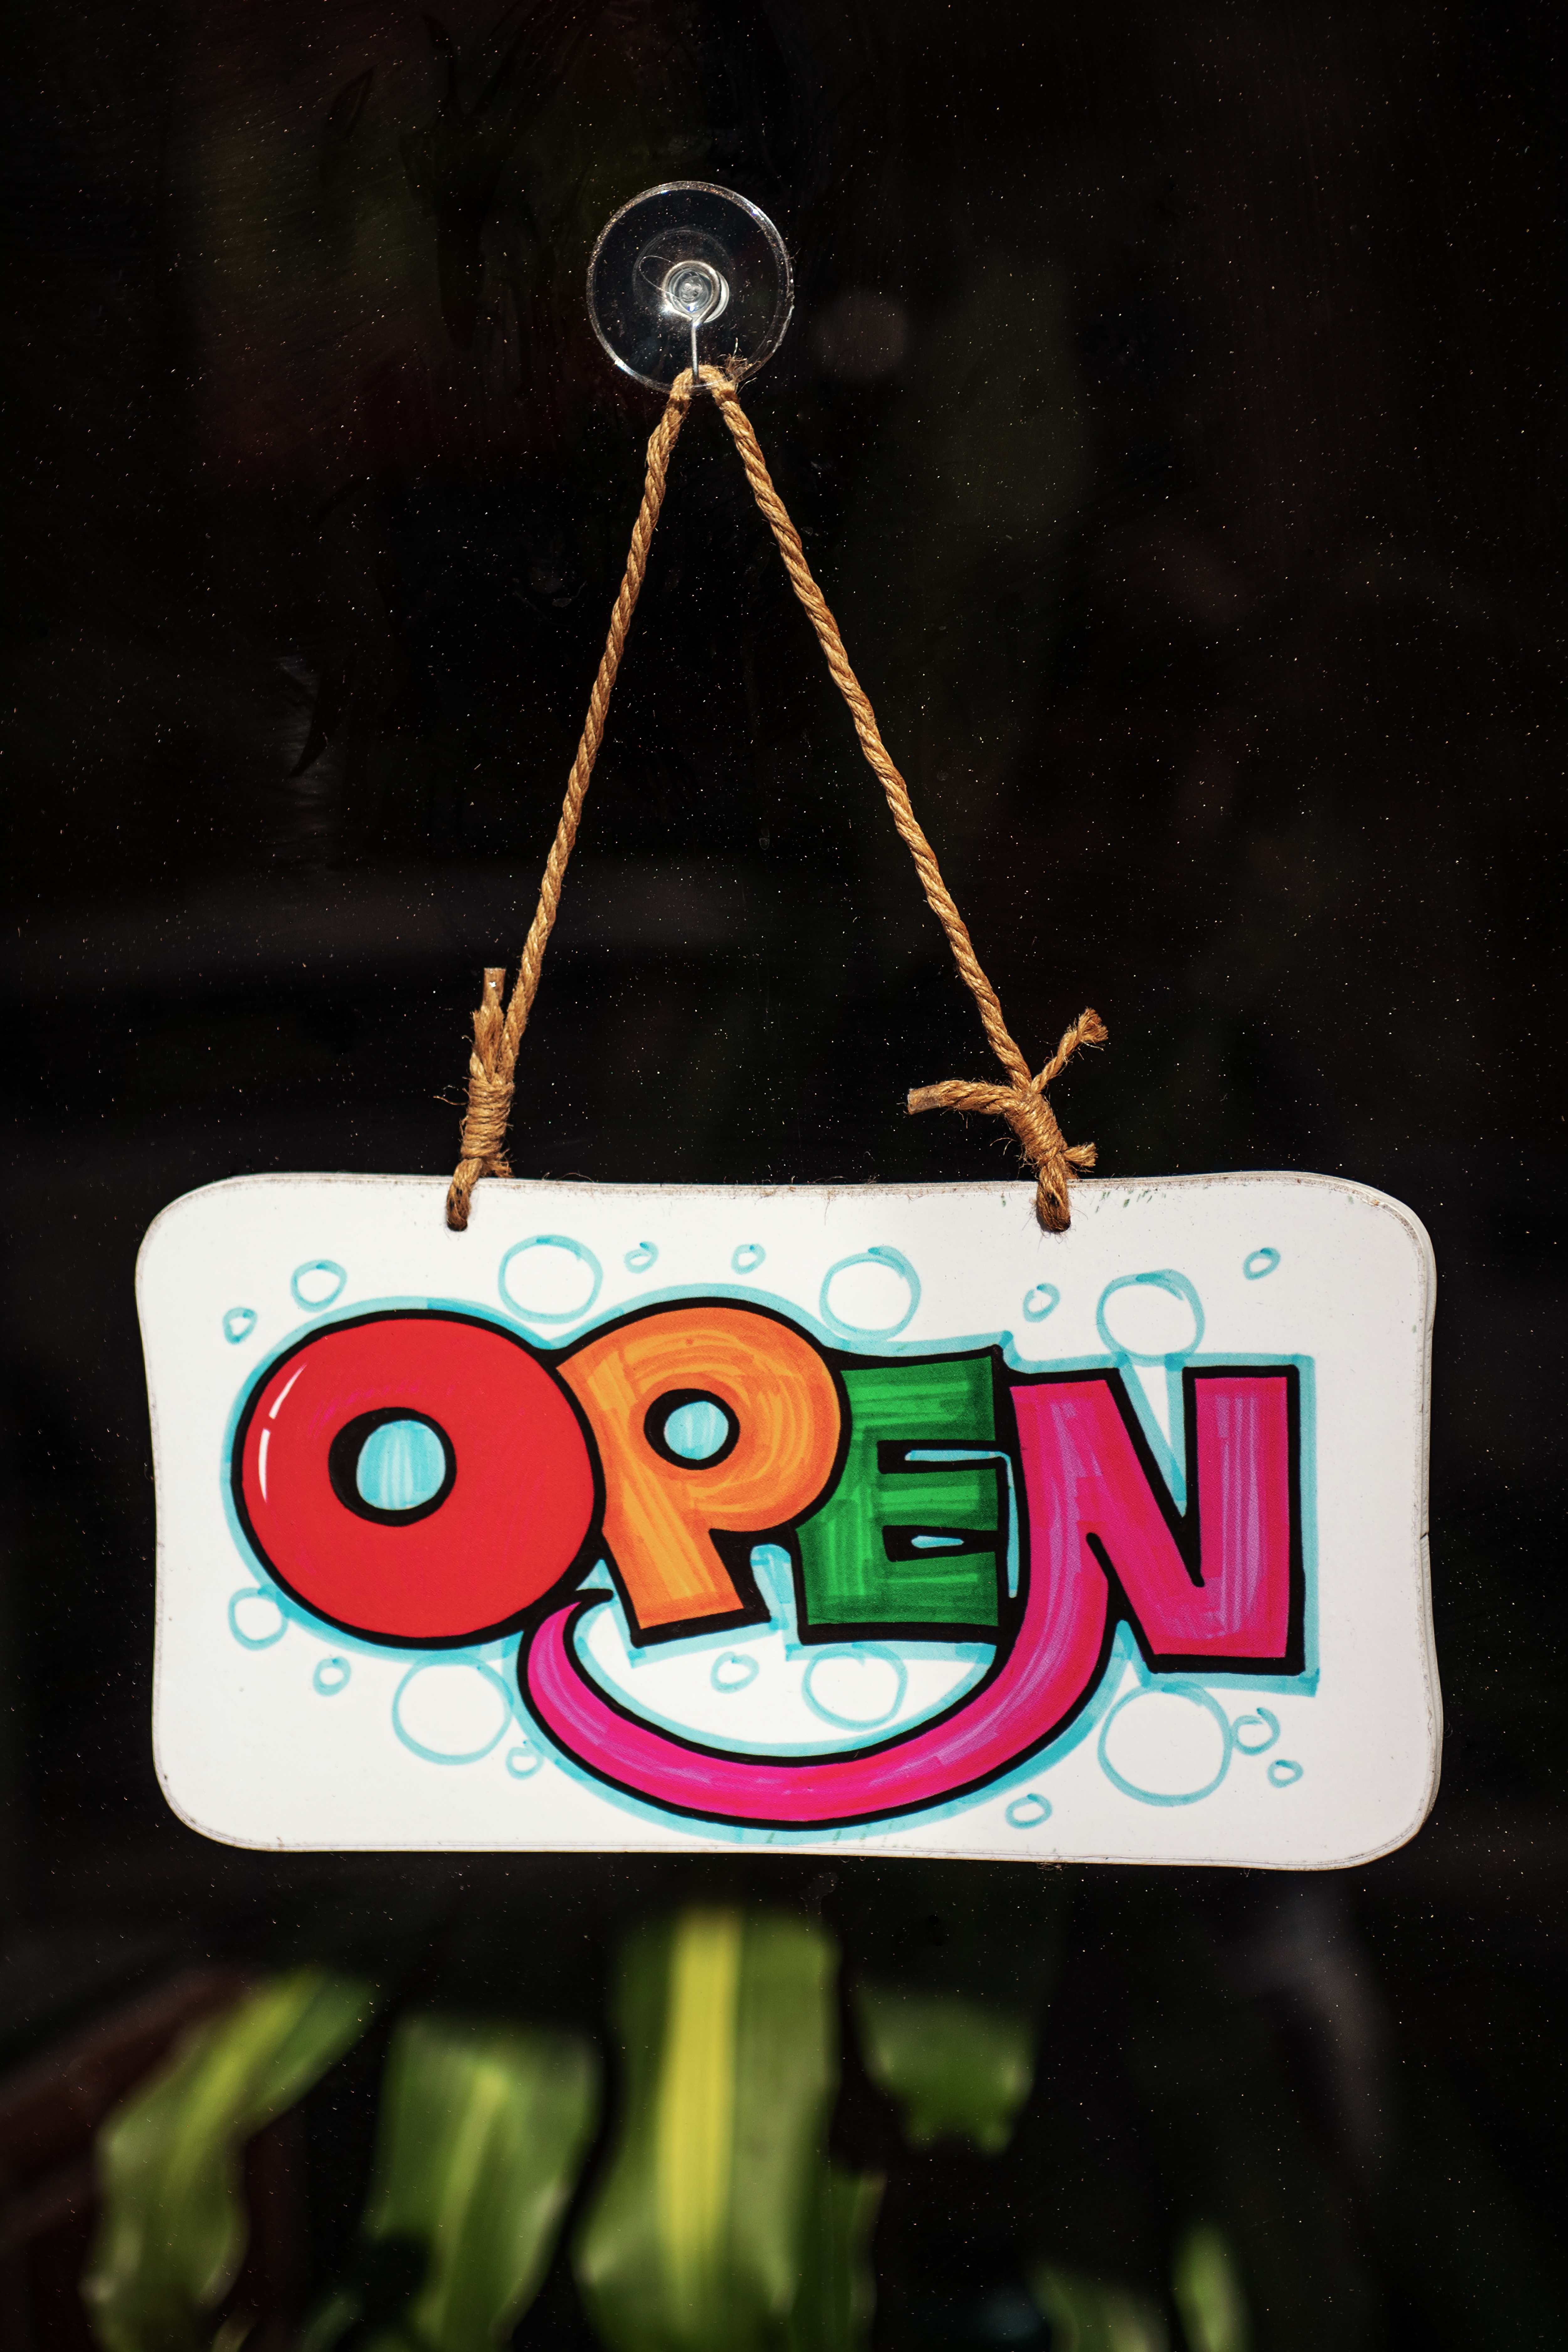 words, multicolored, motley, inscription, text, sign, signboard, open, it's open